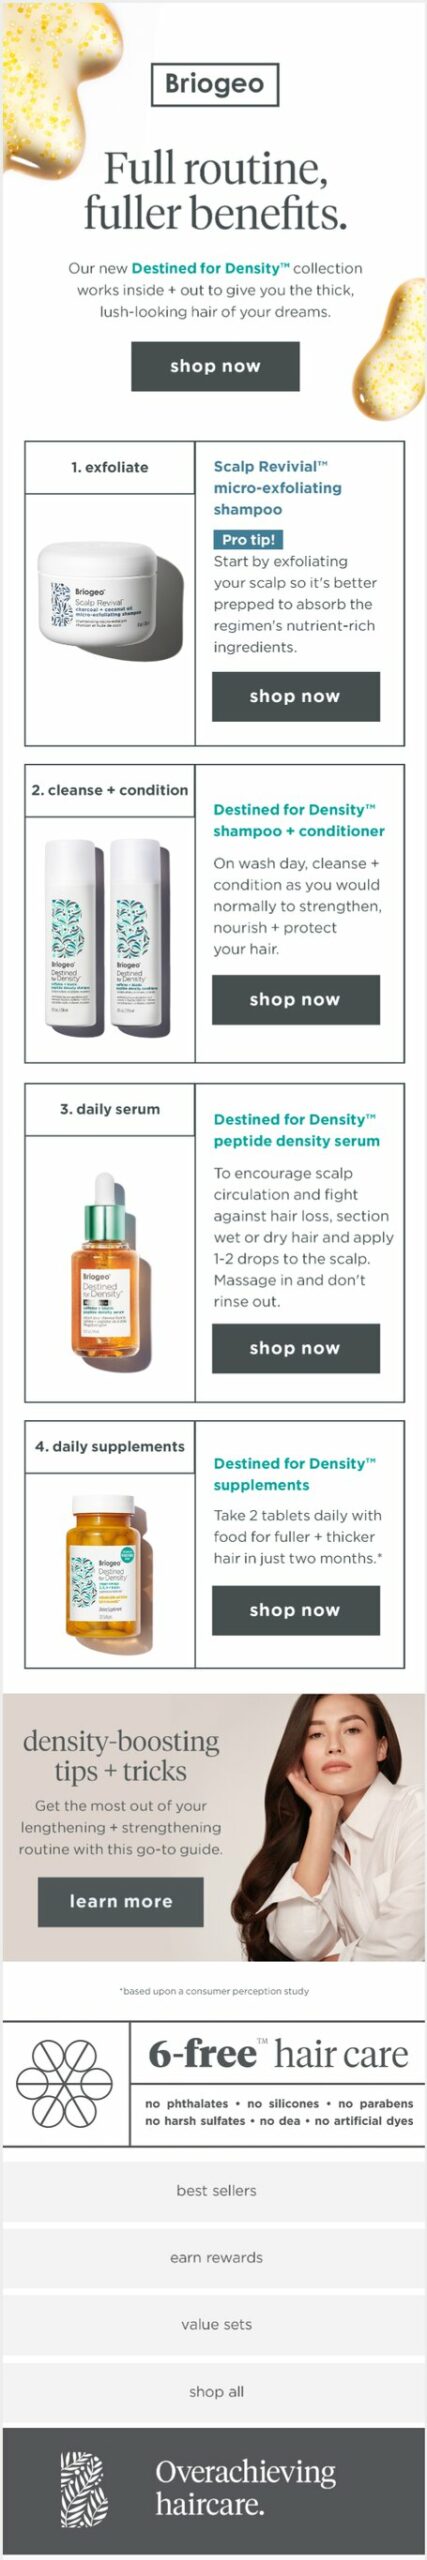 Haircare product sample promotions